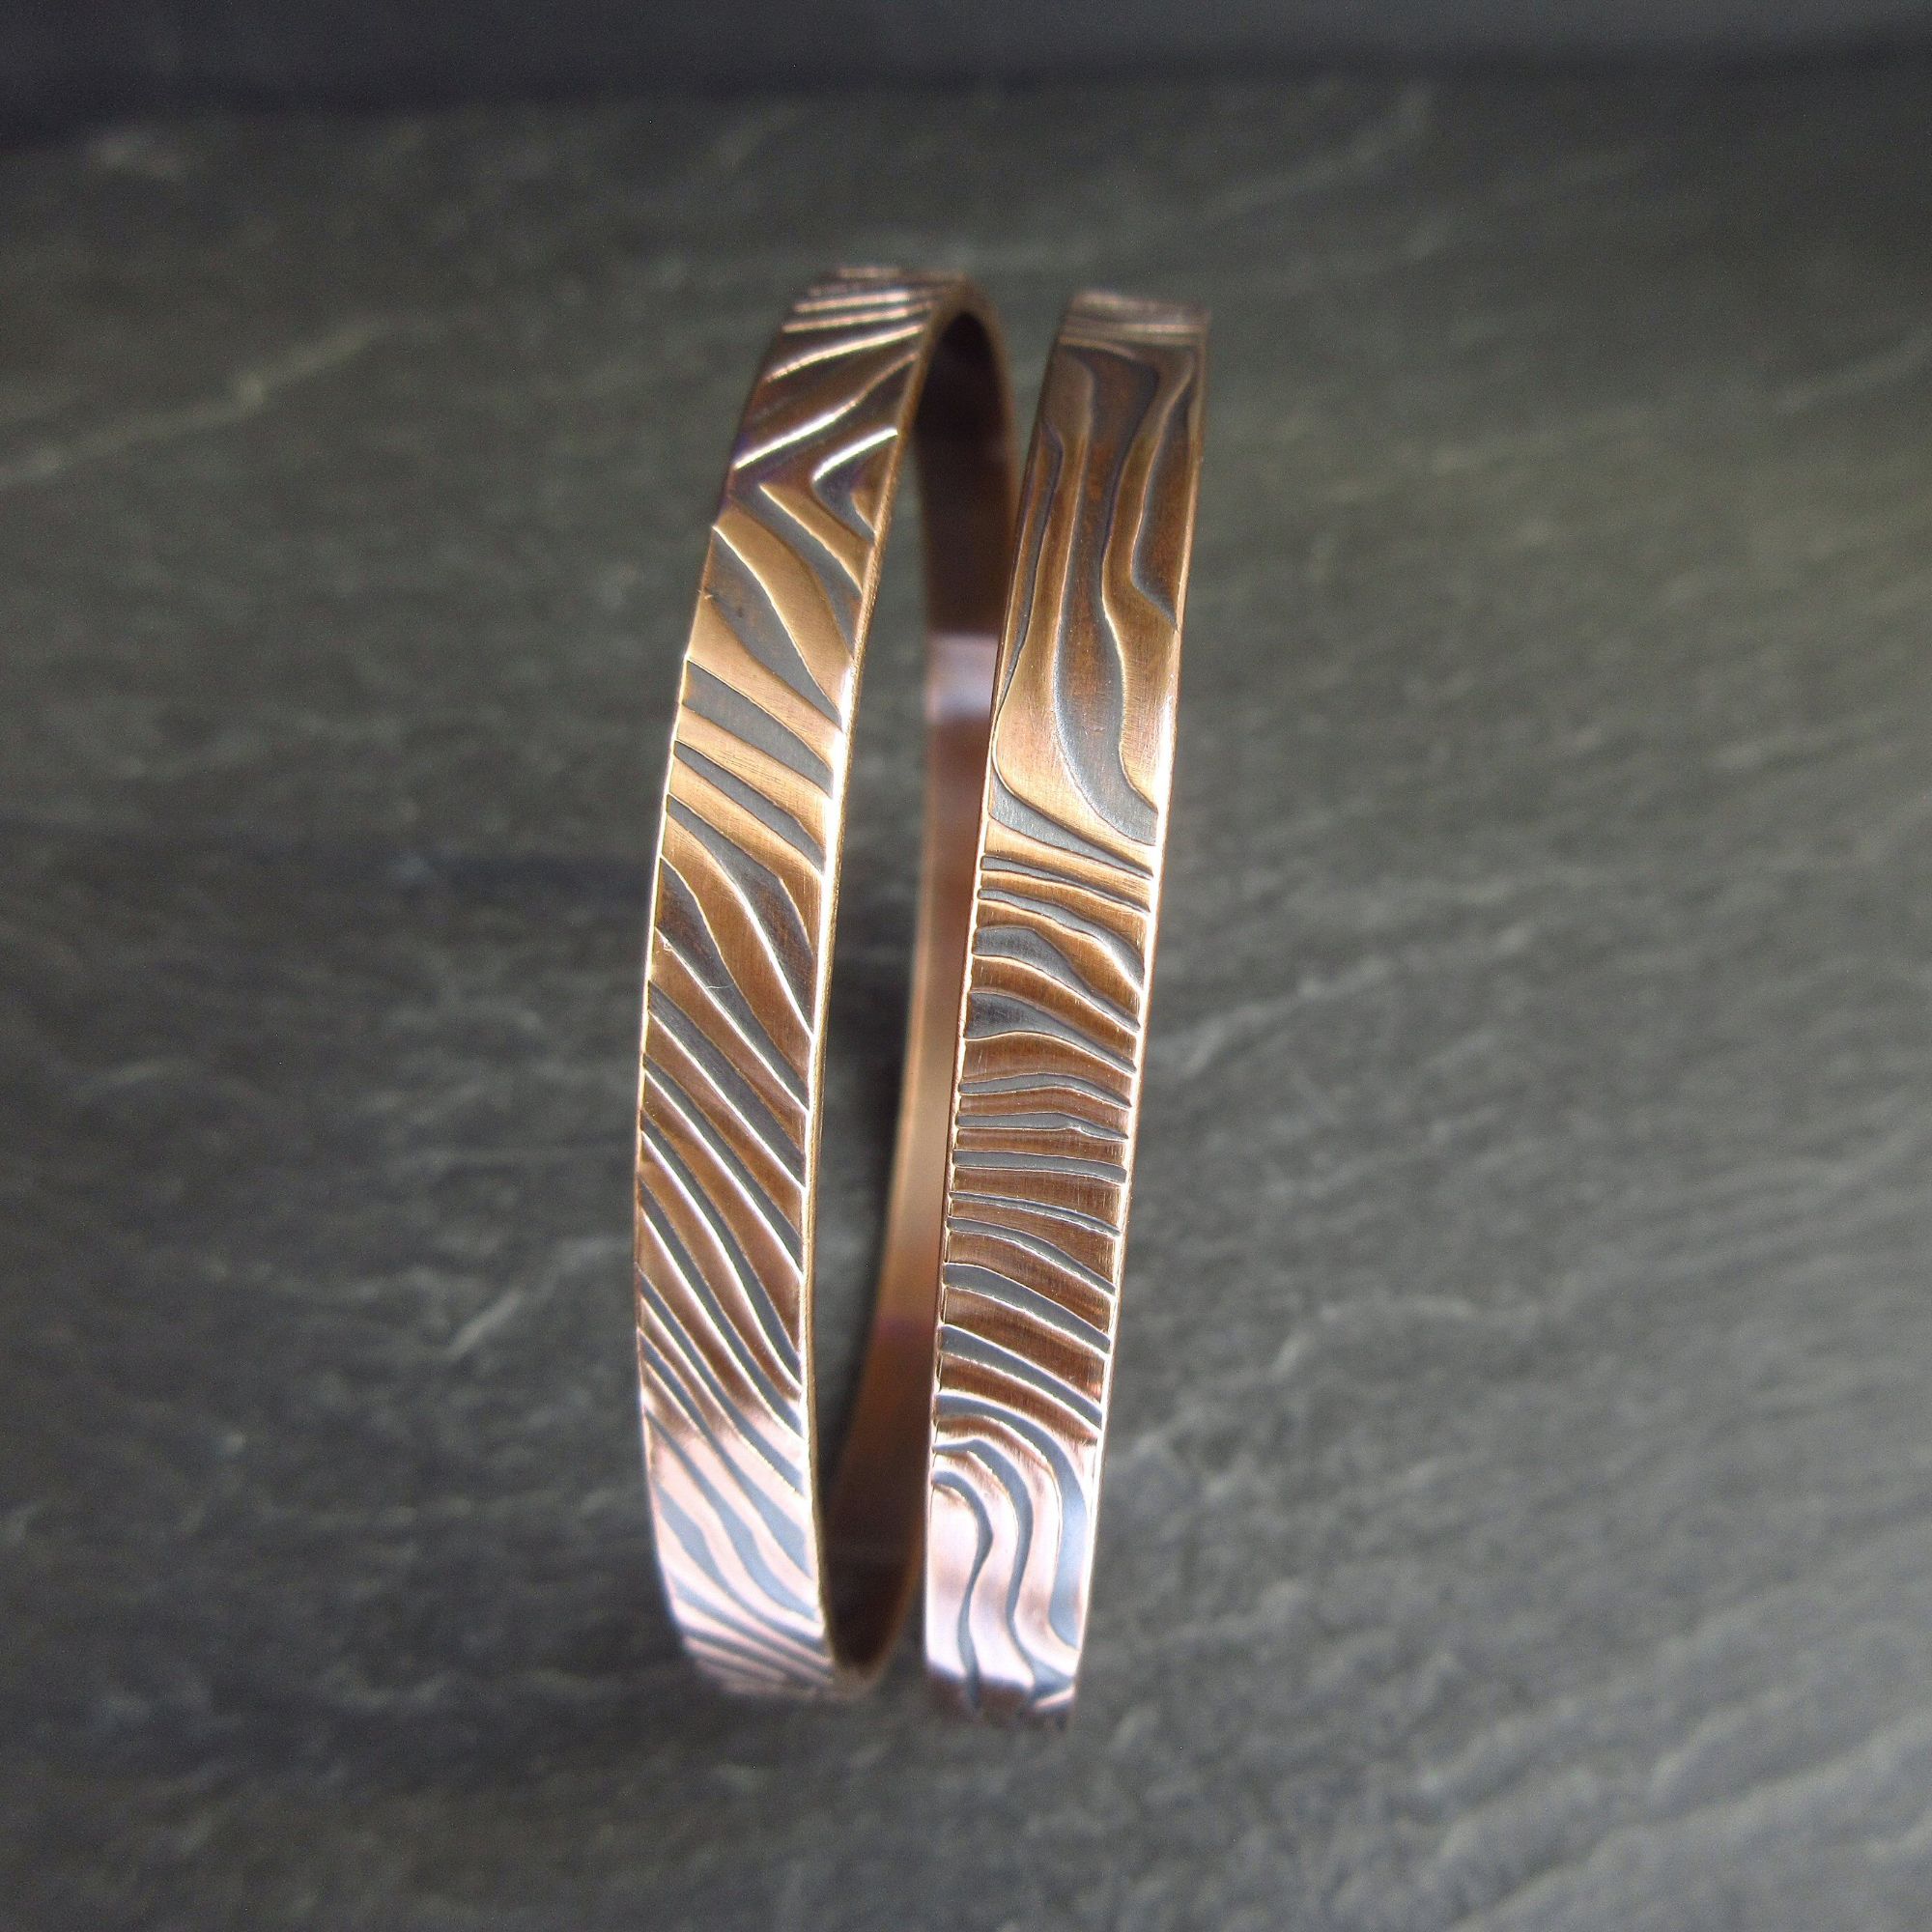 bronze bangles with ripple pattern texture